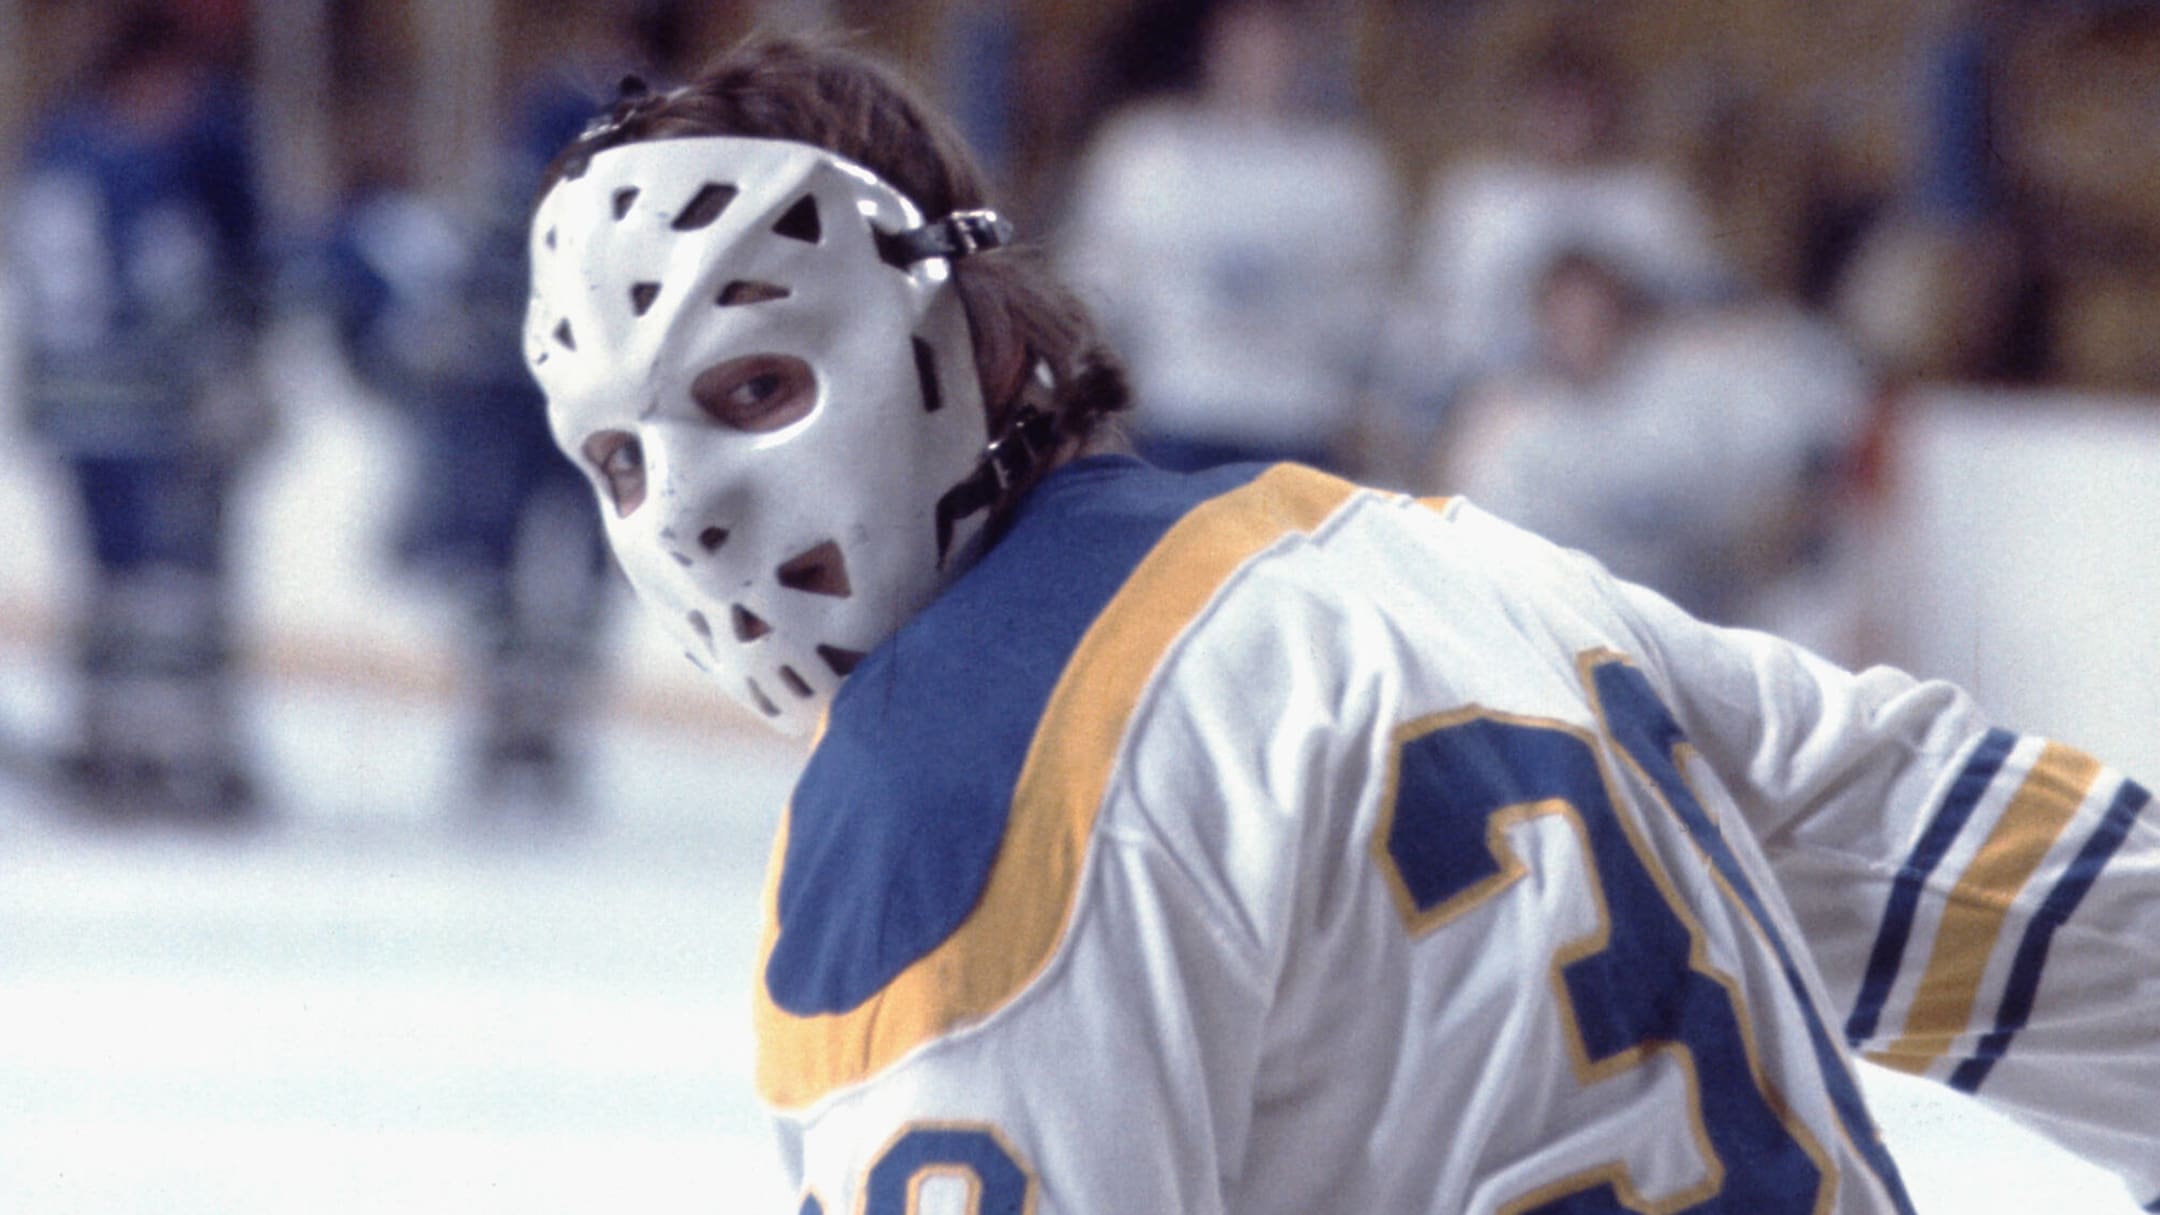 Goalie Mask Evolution Part 2. The first goalie to wear a mask in